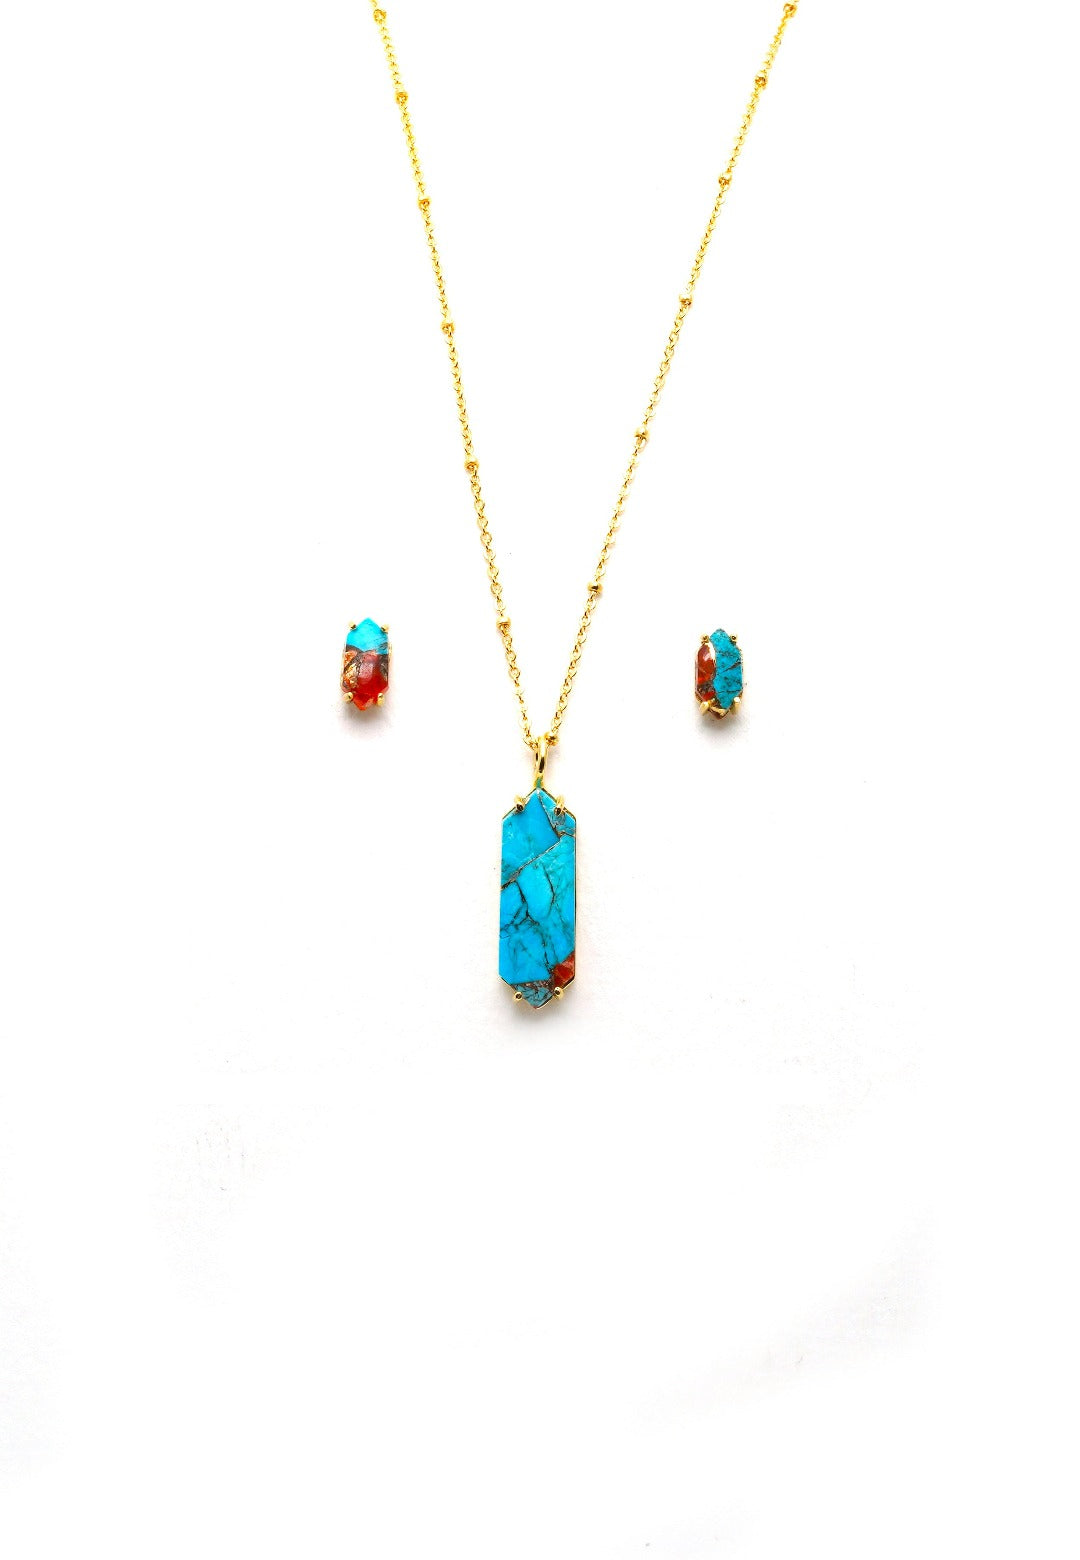 Bullet shaped small blue & orange pendant with stud earrings